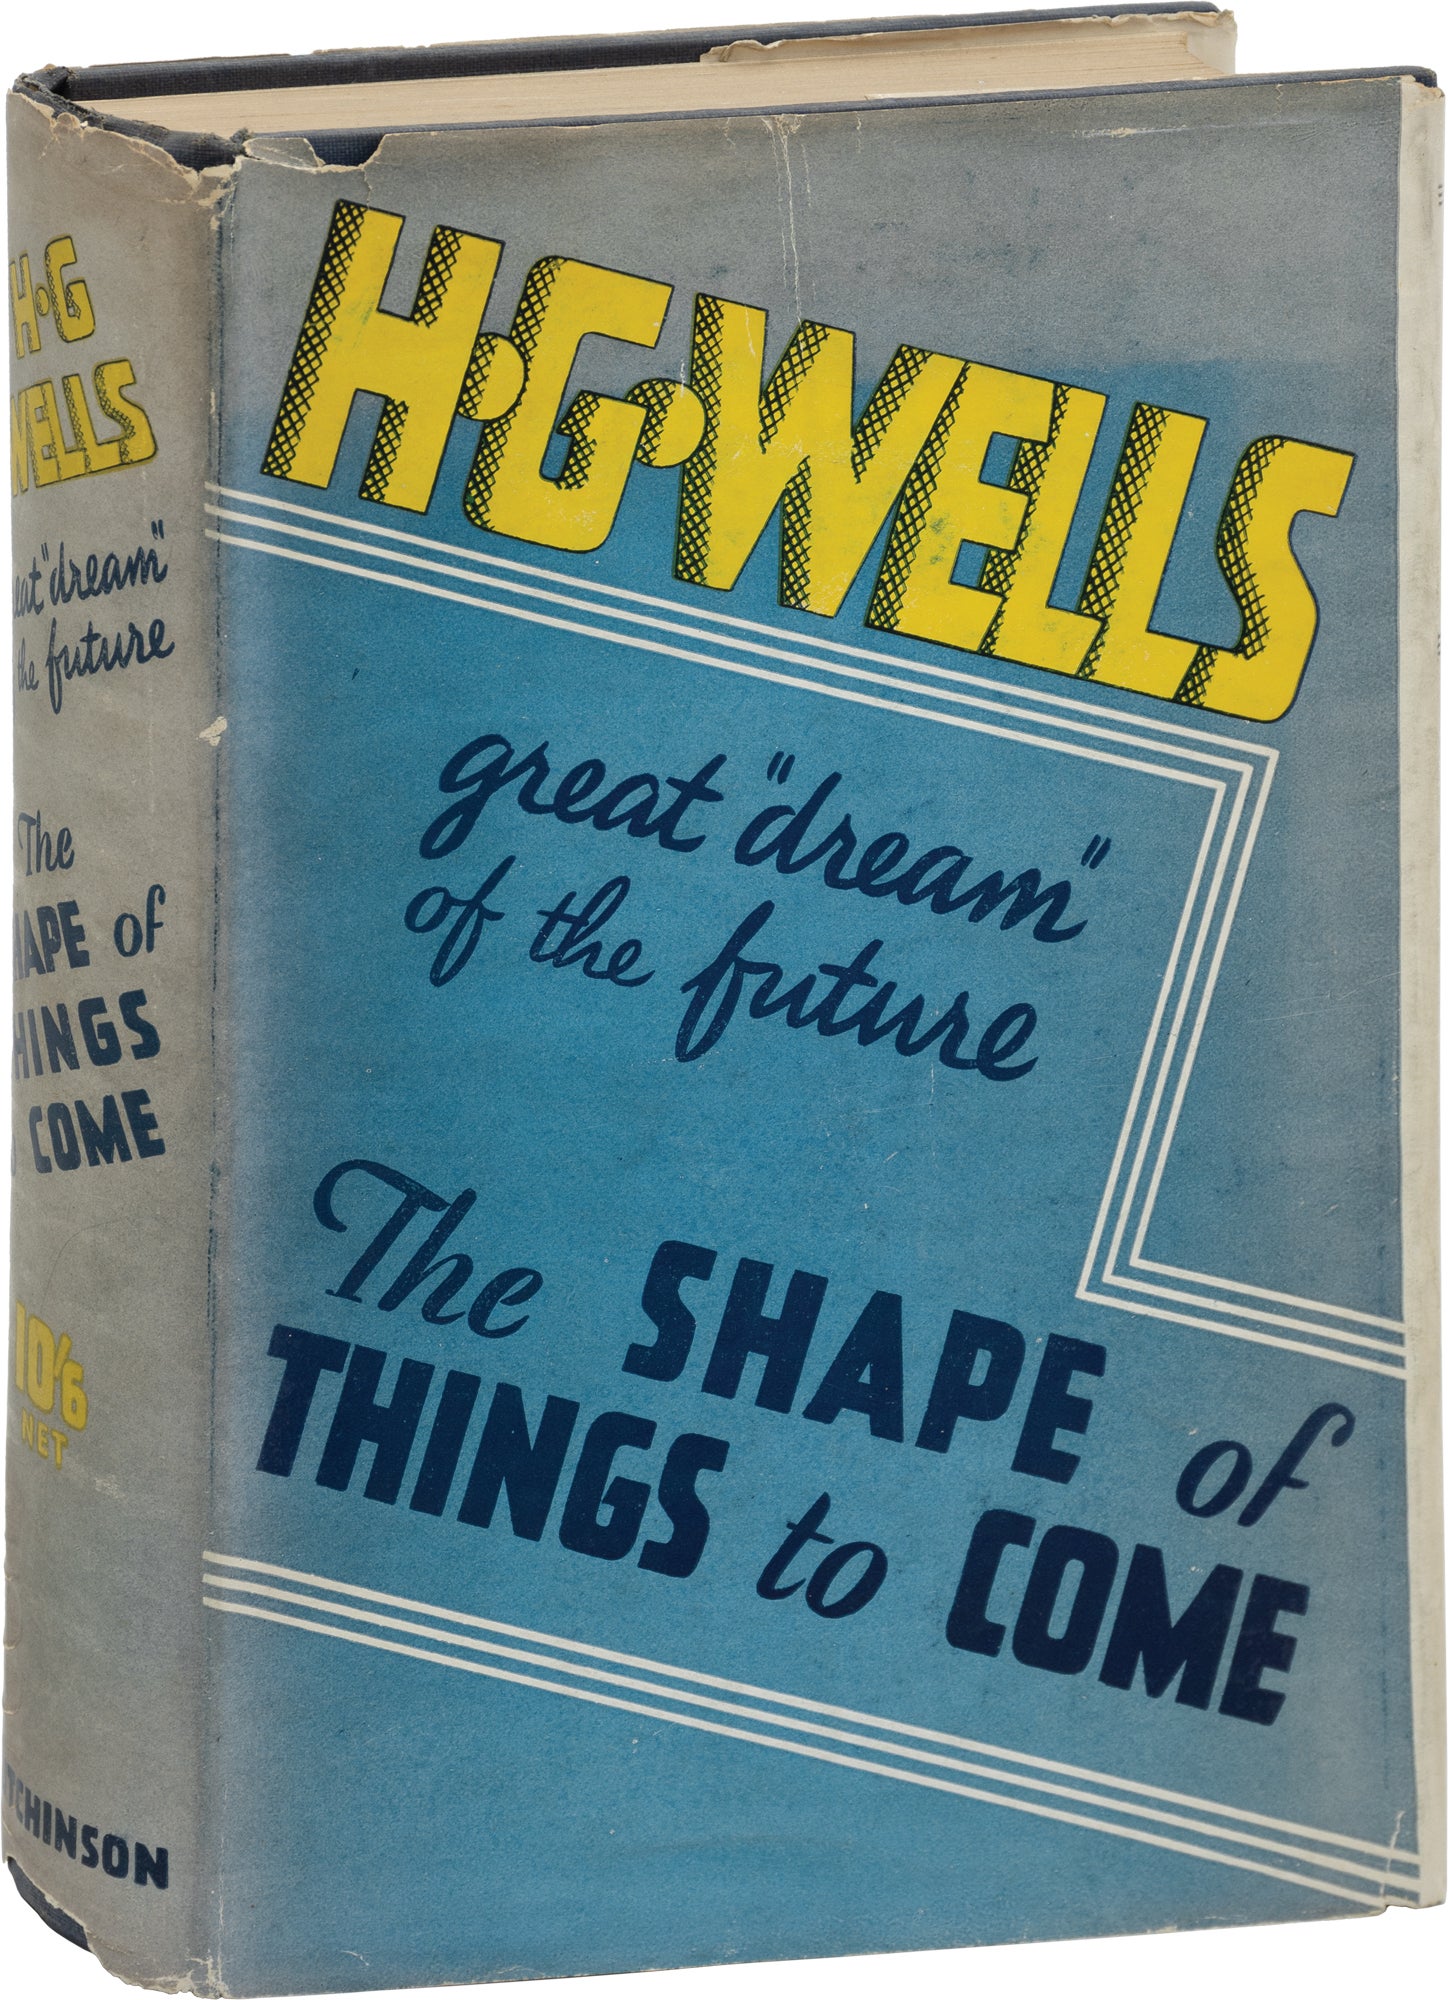 The Shape of Things to Come by H G. Wells on Royal Books